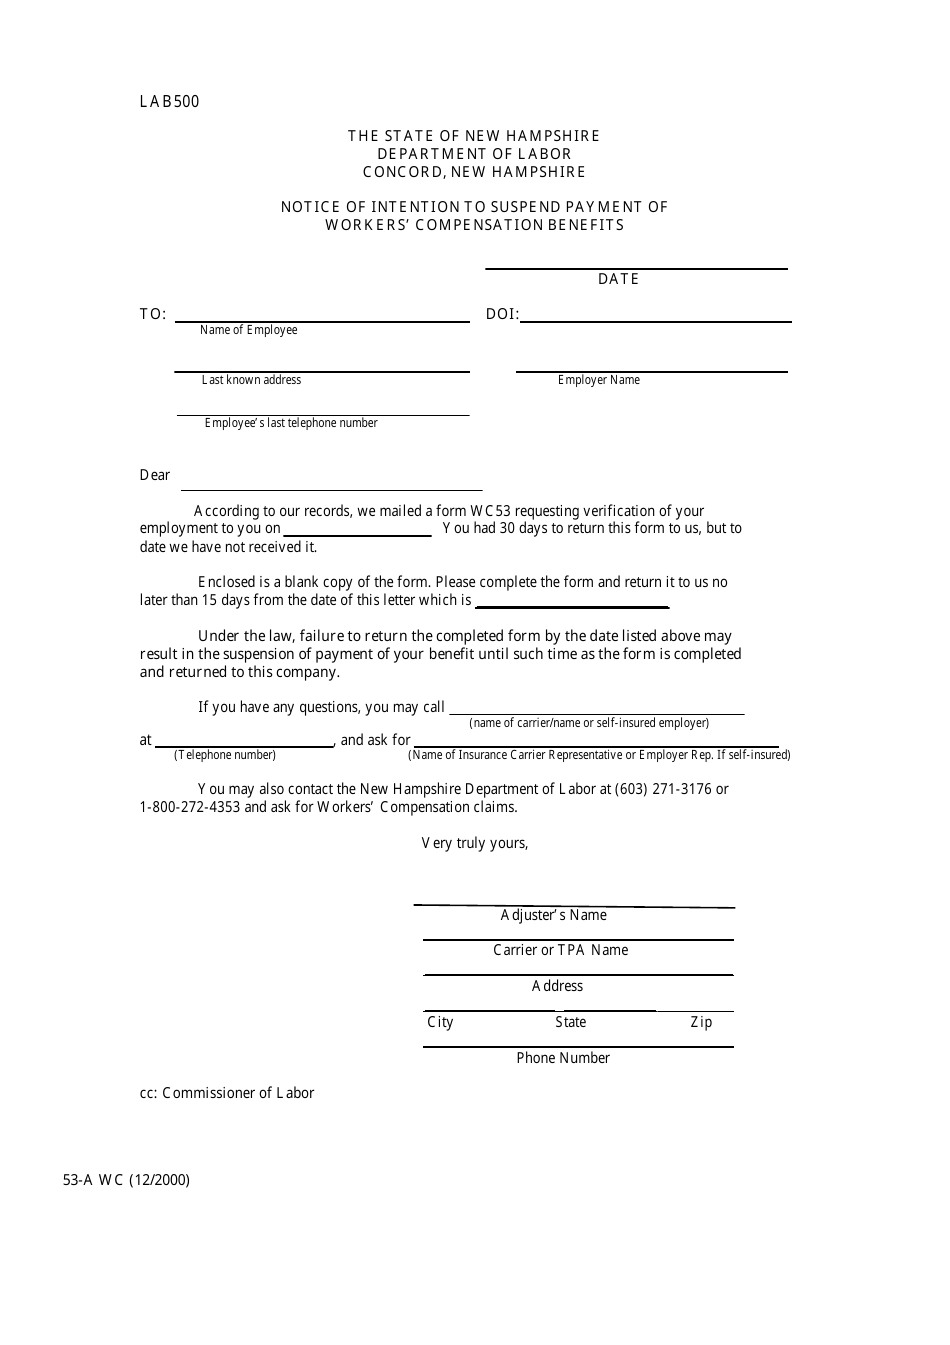 Form 53-A WC Notice of Intention to Suspend Payment of Workers Compensation Benefits - New Hampshire, Page 1